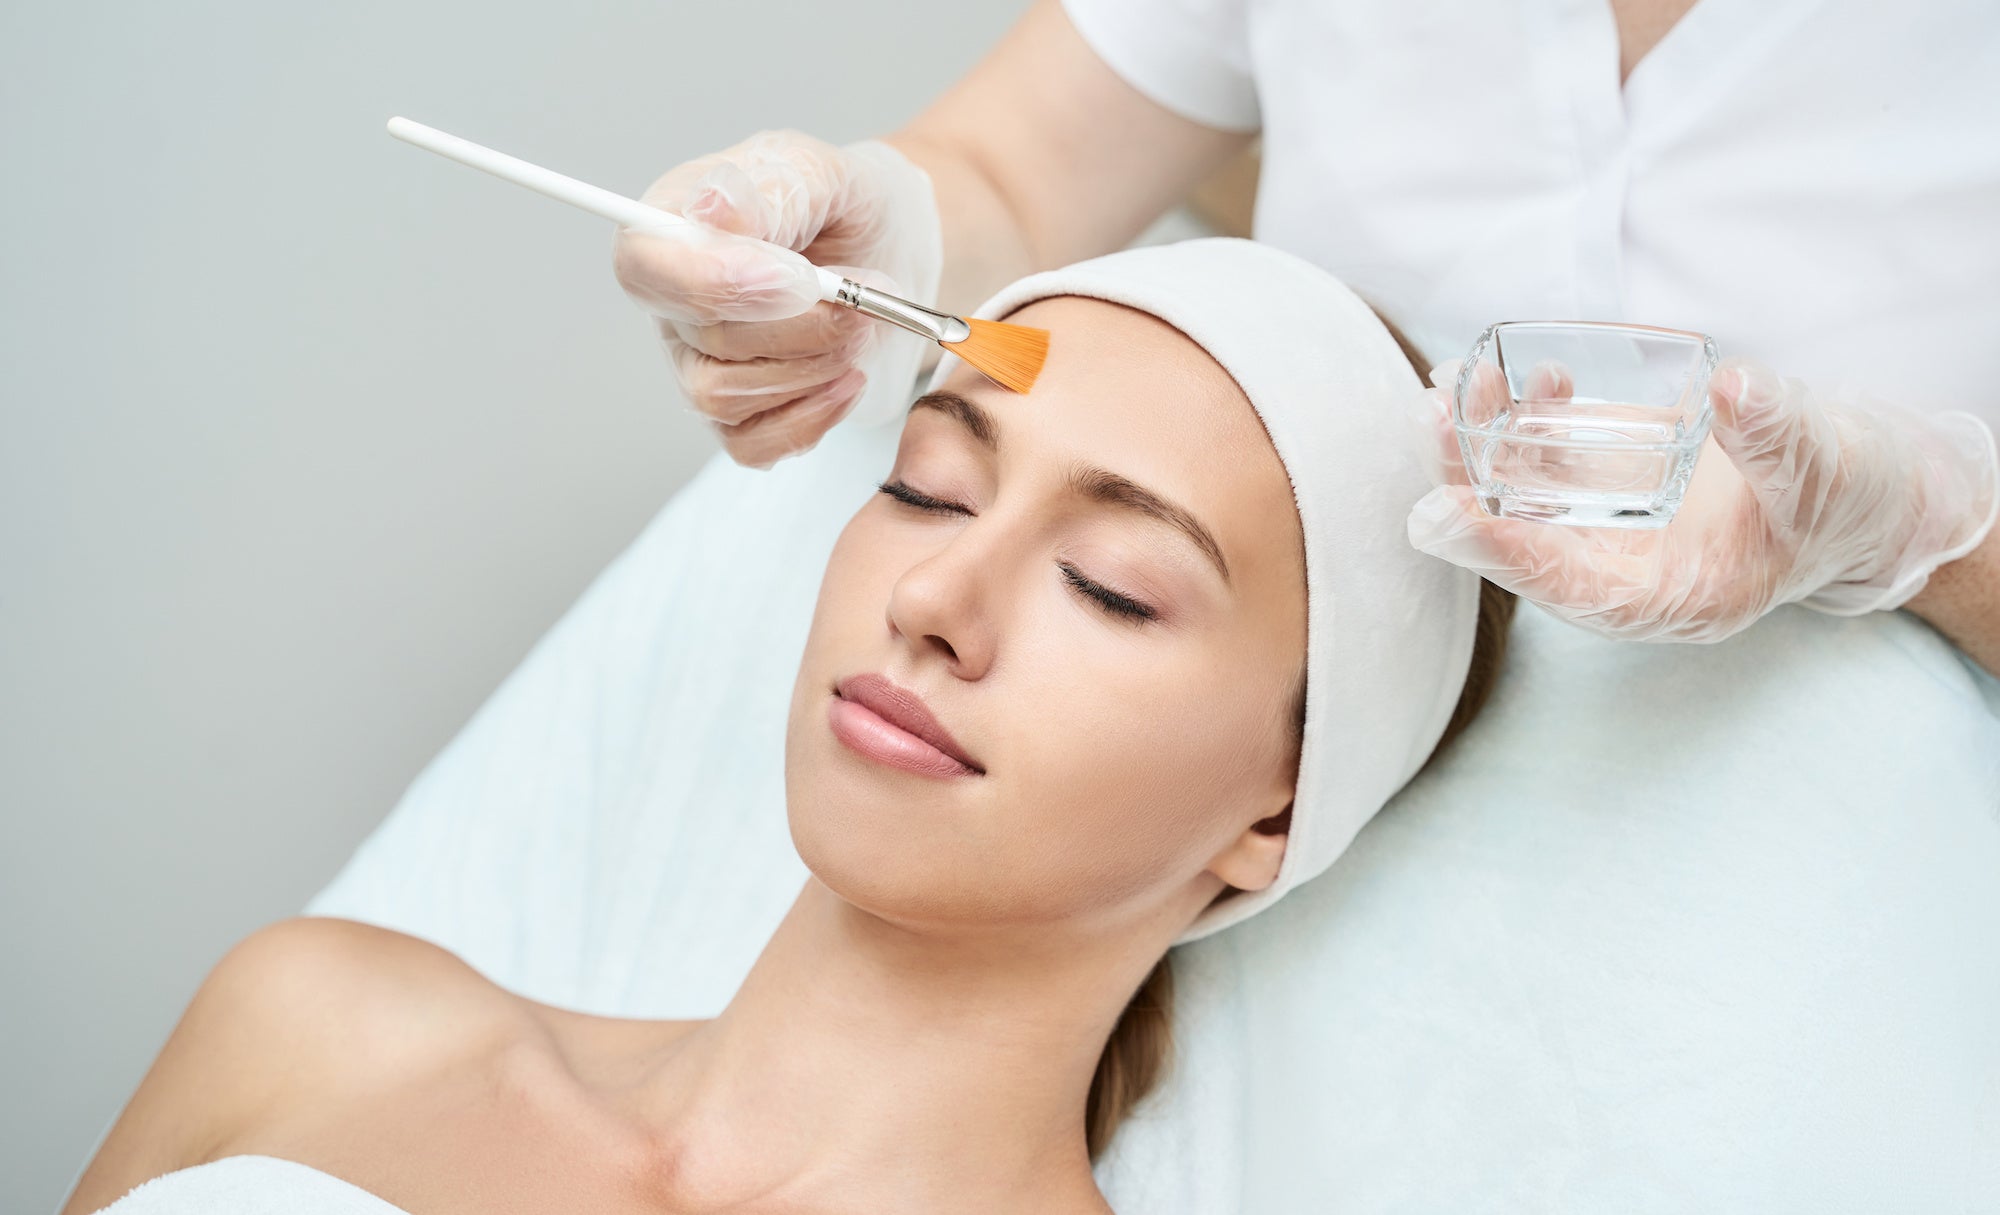 What is a Chemical Peel and Why Get One?